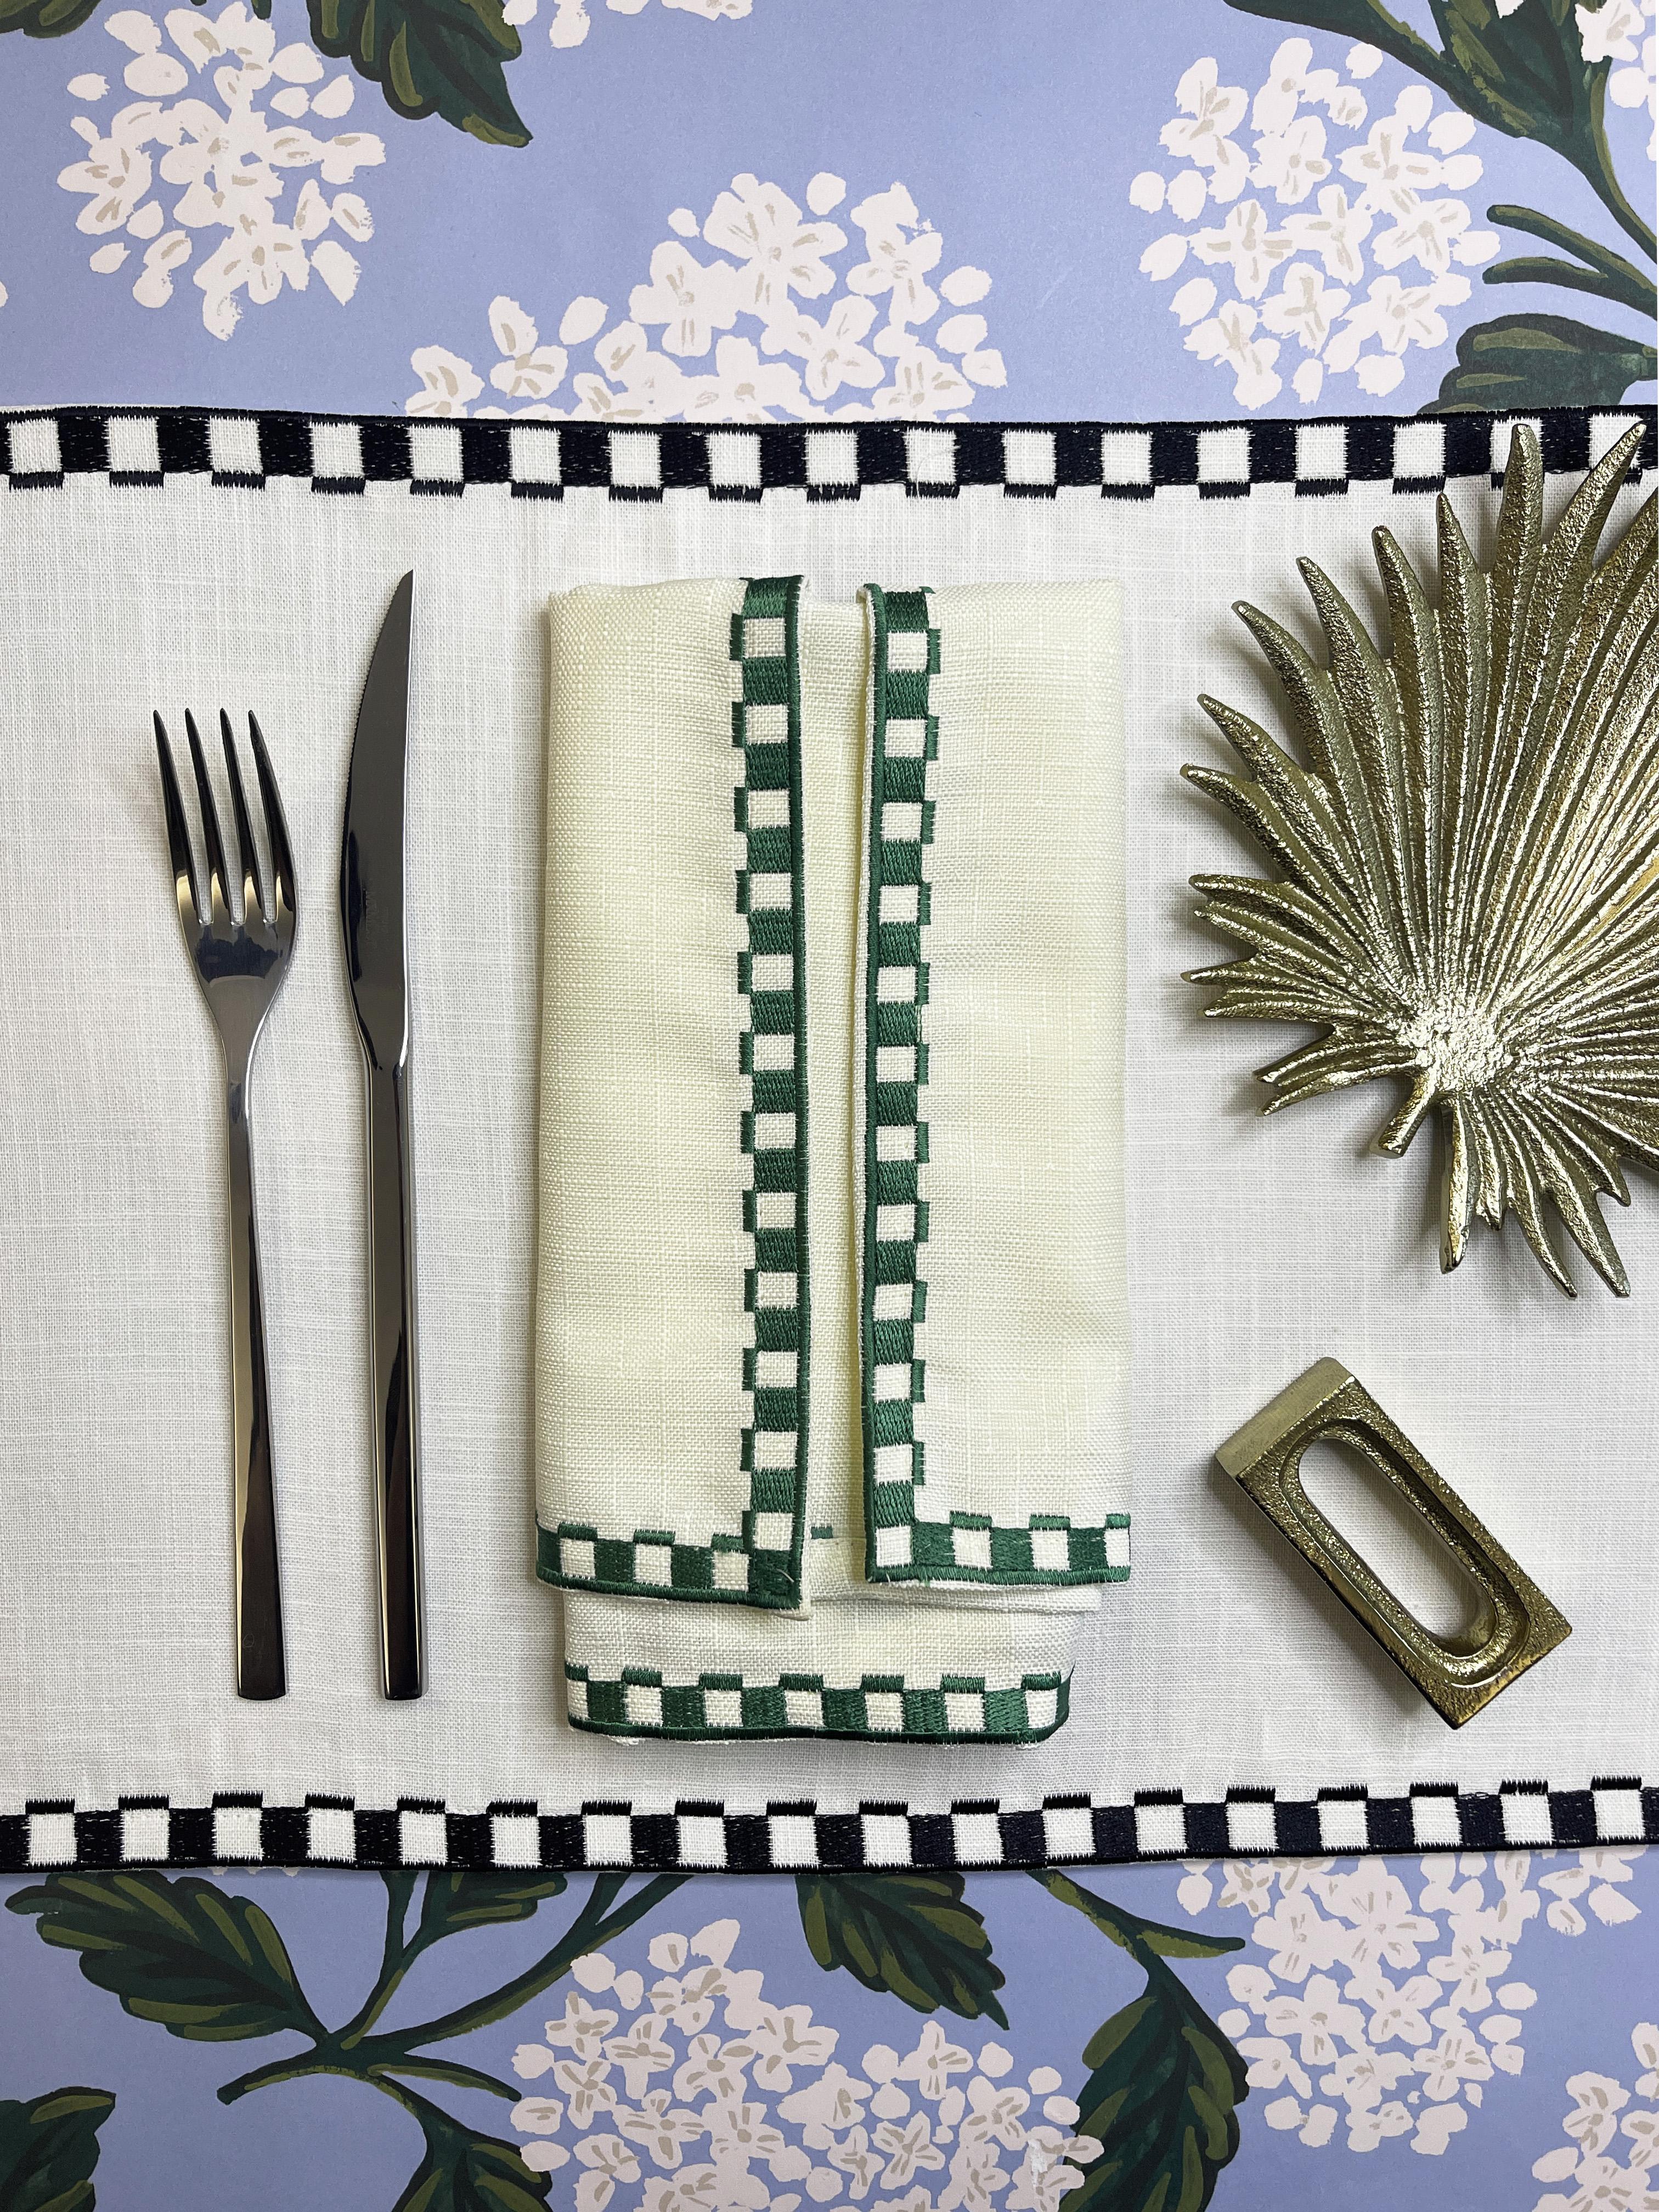 The Les Noelles dinner napkin will elevate your dining experience. The 100% linen napkin features embroidered geometrical patterns that outline the edge and gives the napkin a finished look. This is a set of 4 napkins.

100% Linen
Dimension: 22